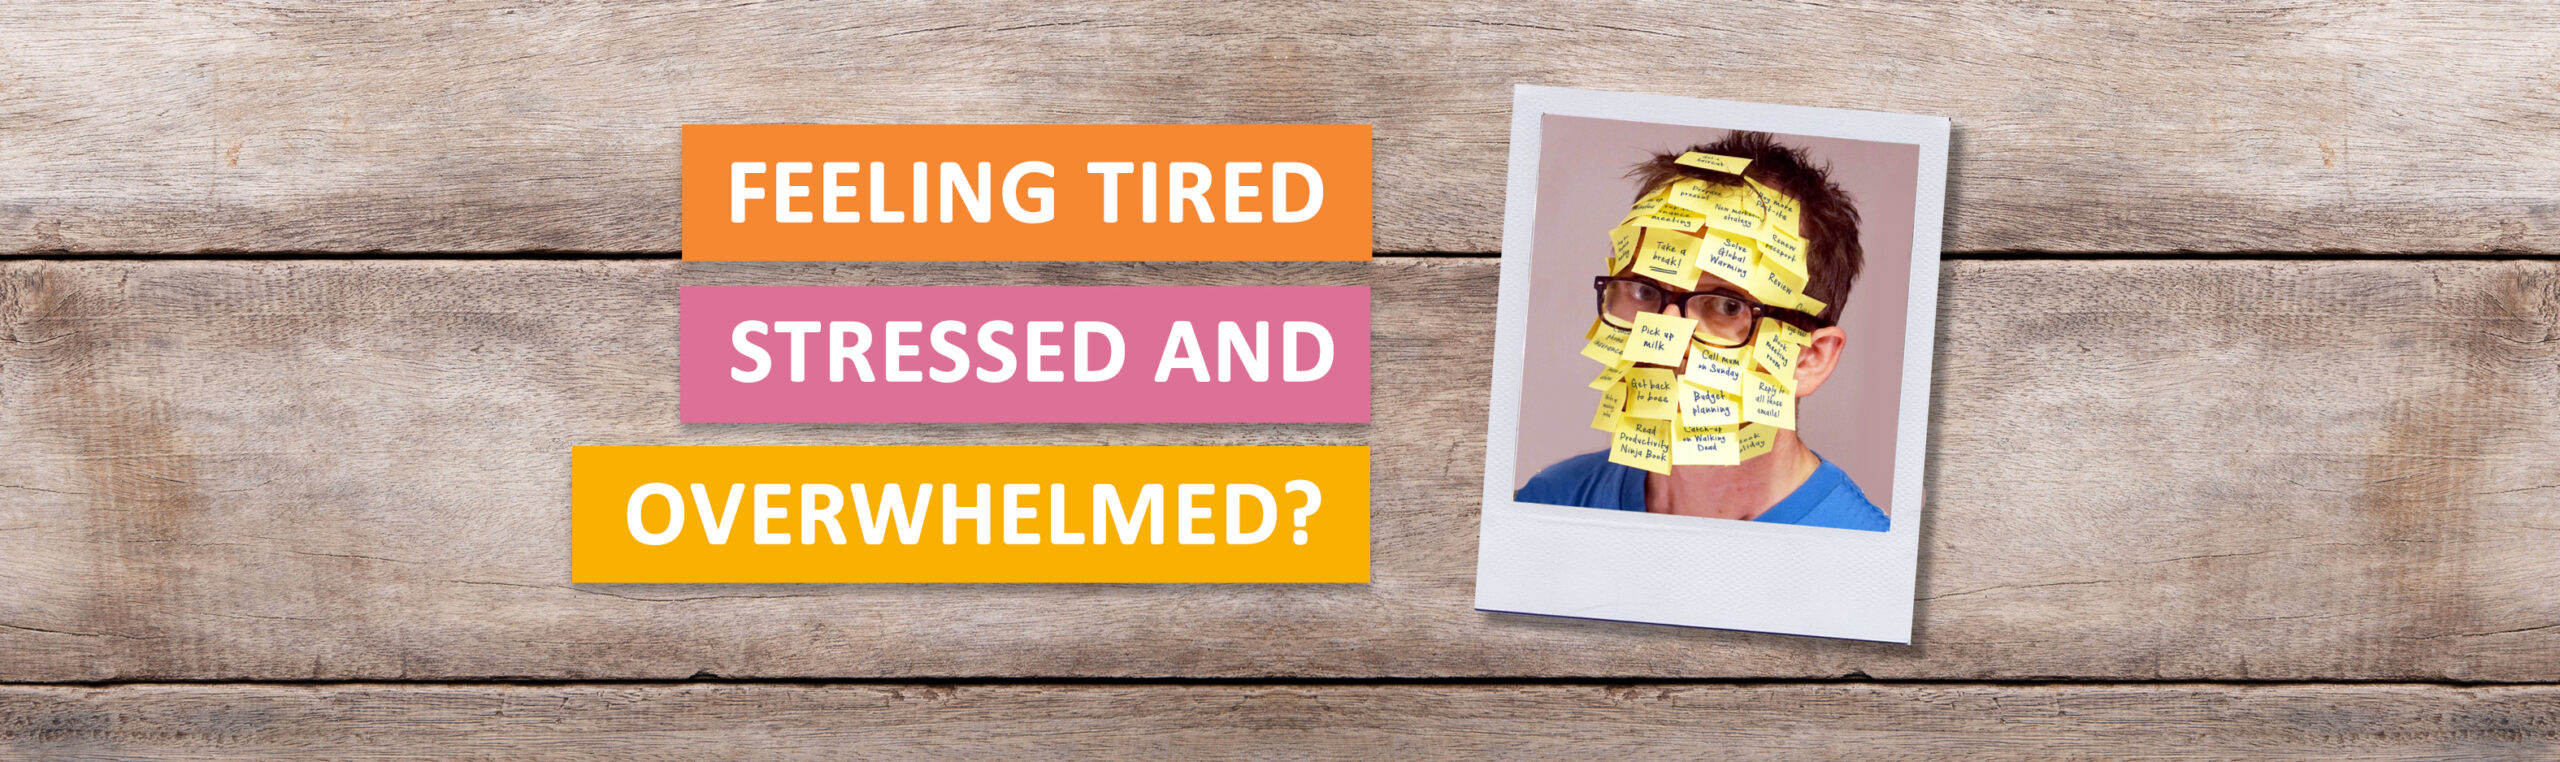 Feeling tired, stressed and overwhelmed?